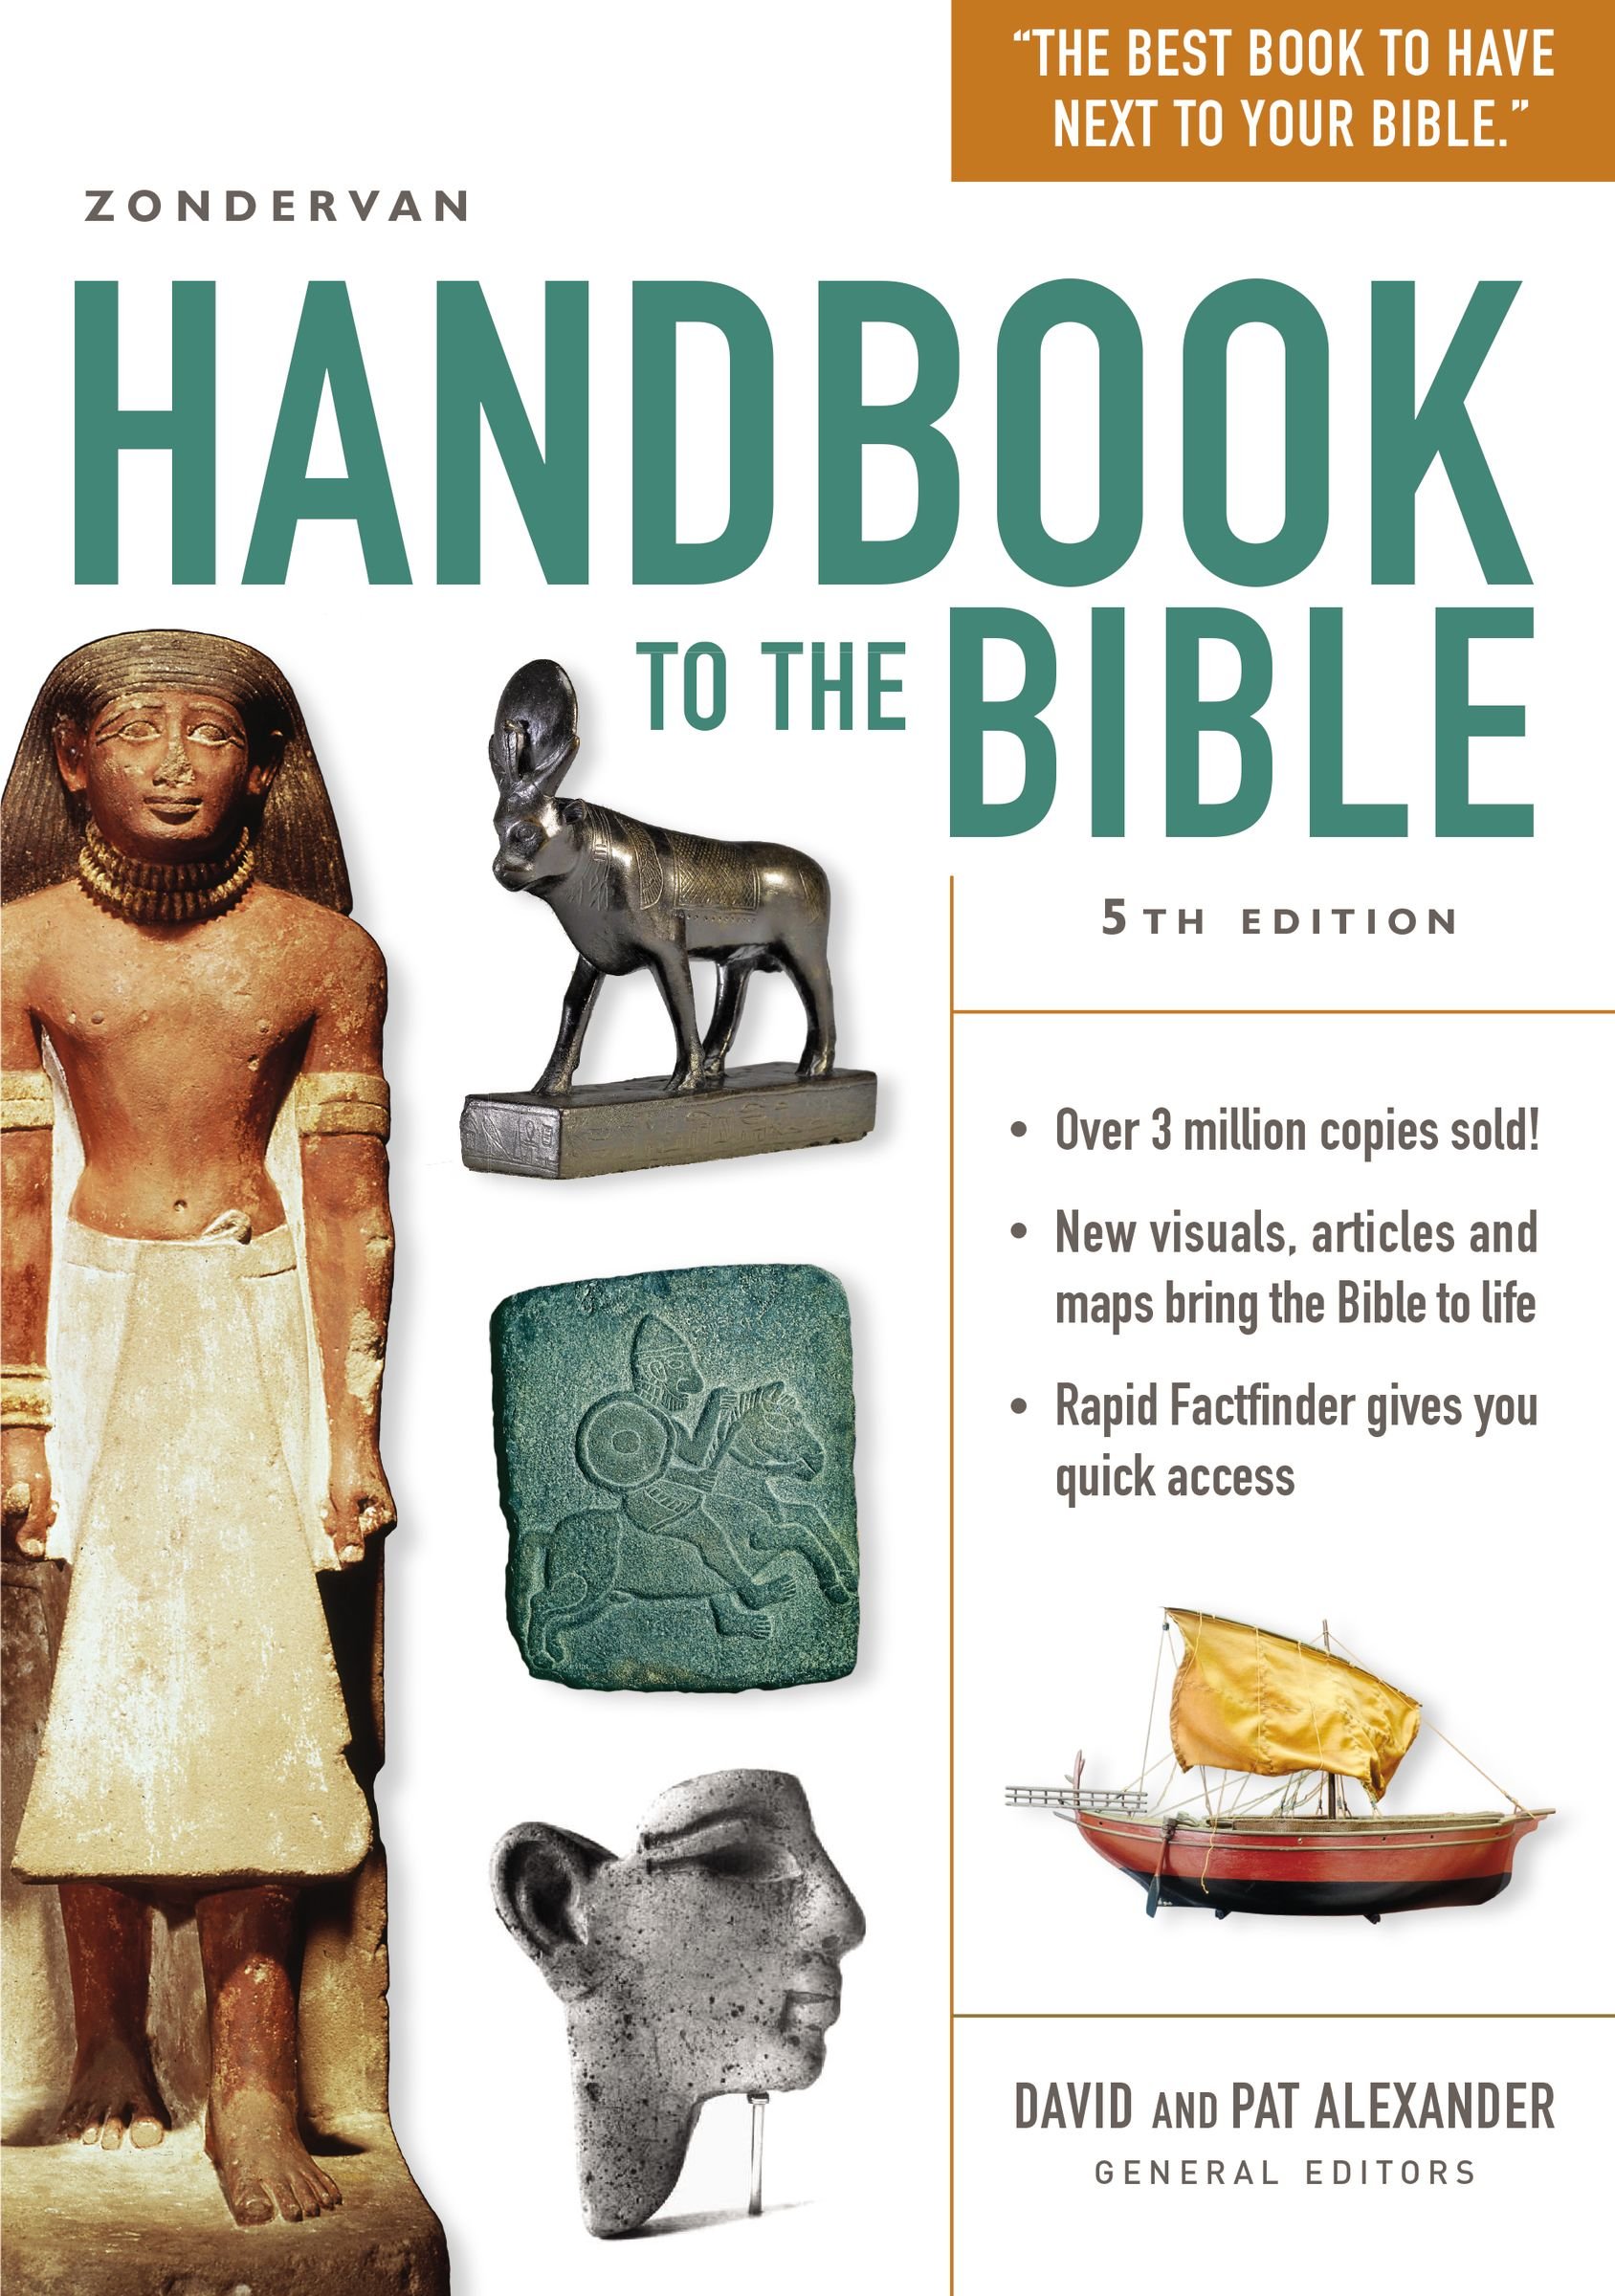 Book Notice: ZONDERVAN HANDBOOK TO THE BIBLE: FIFTH EDITION, edited by David and Pat Alexander